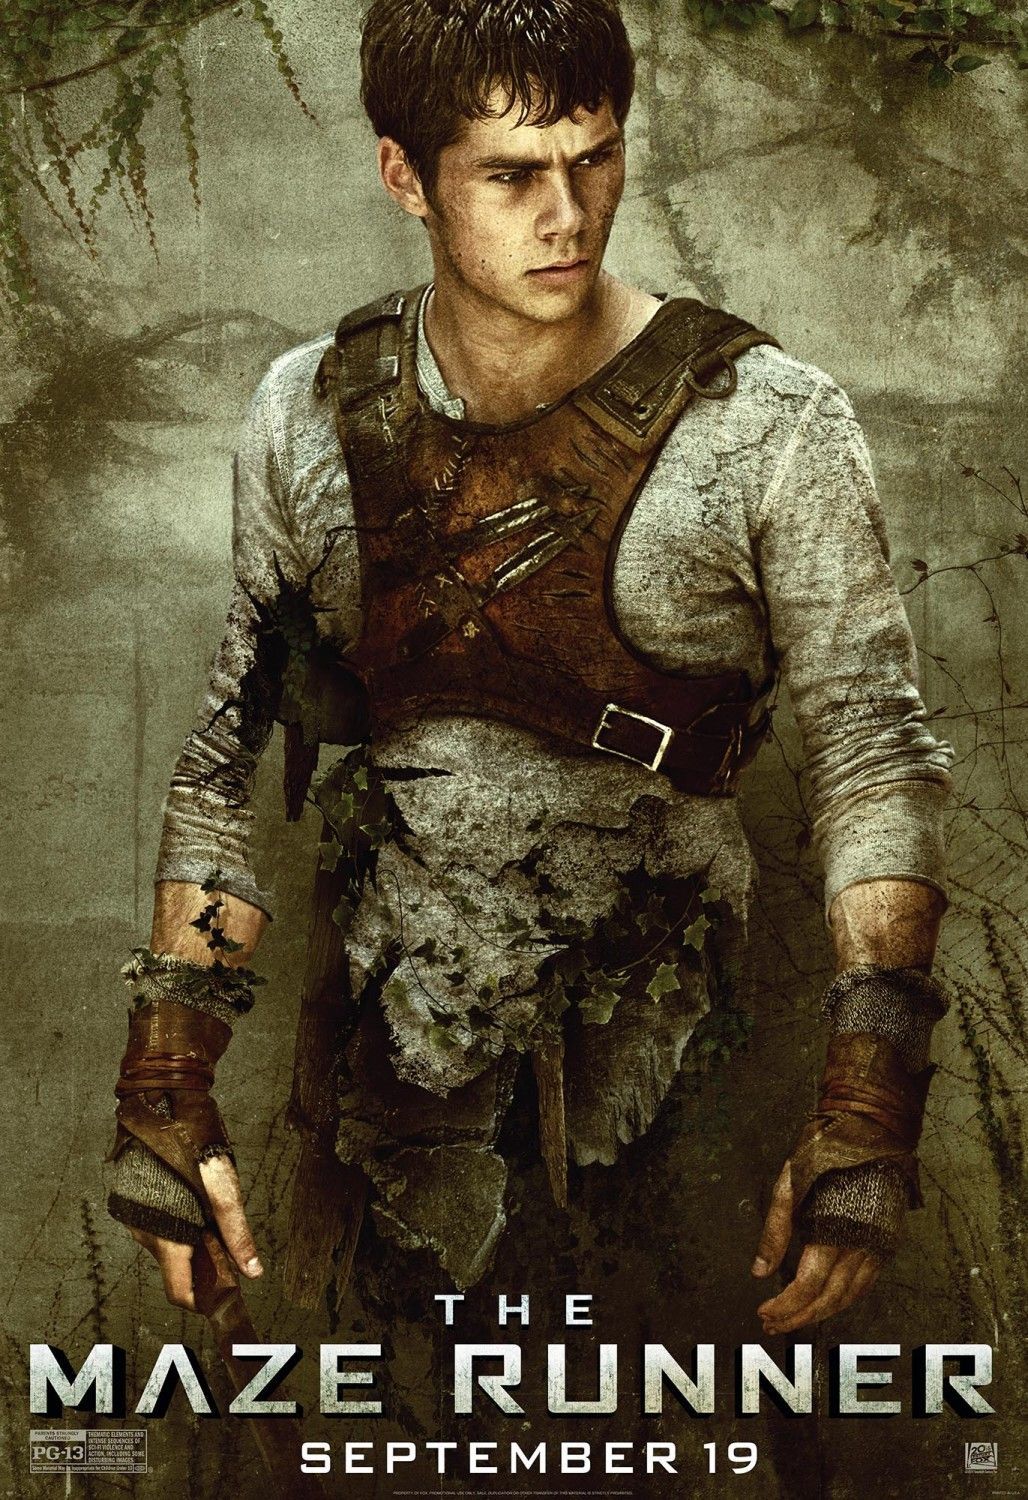 MAZE RUNNER: New character posters